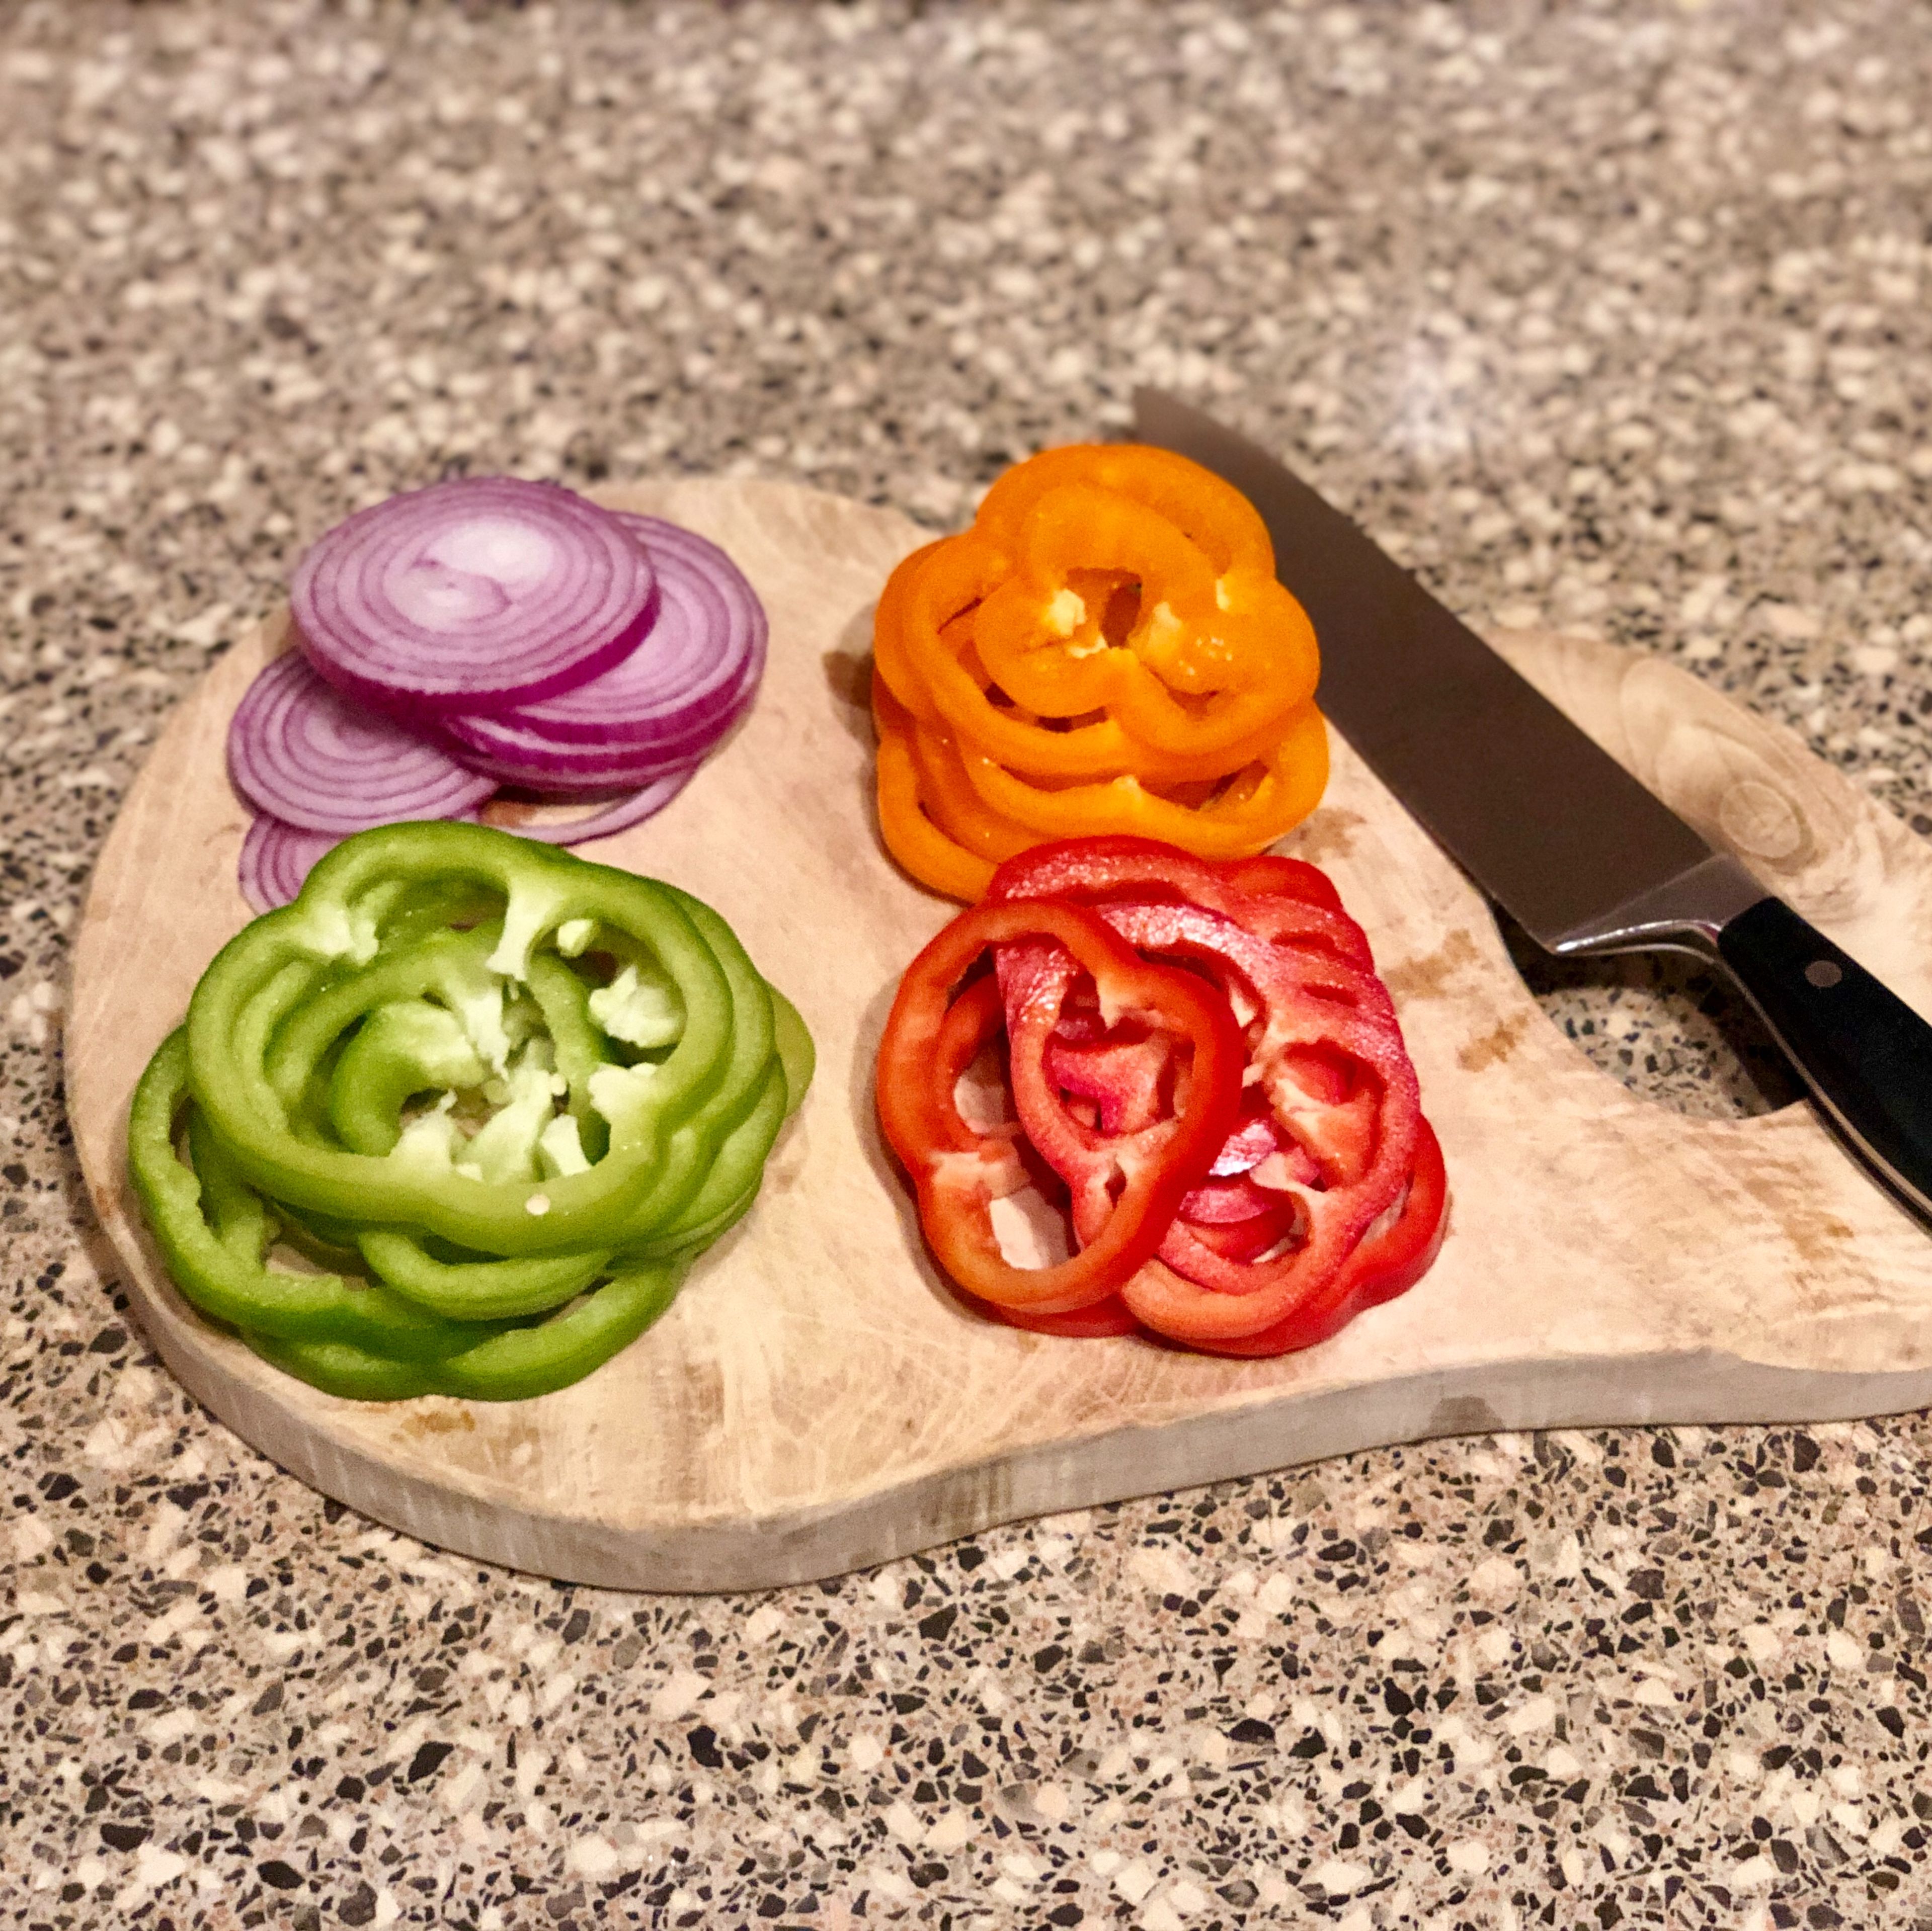 Cut tricolor bell peppers and red onion into rings.